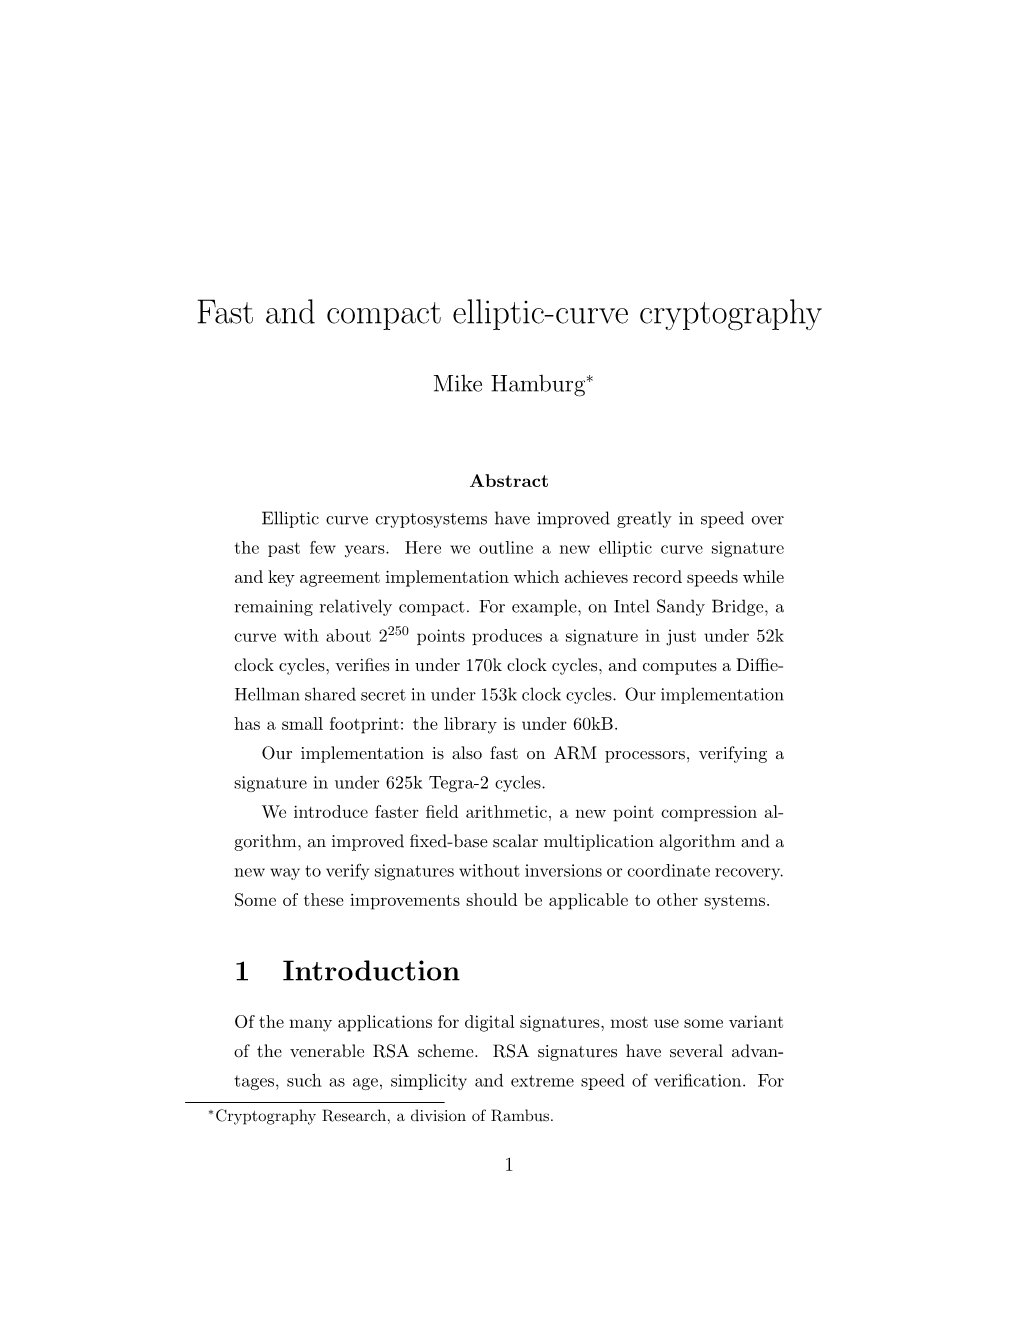 Fast and Compact Elliptic-Curve Cryptography